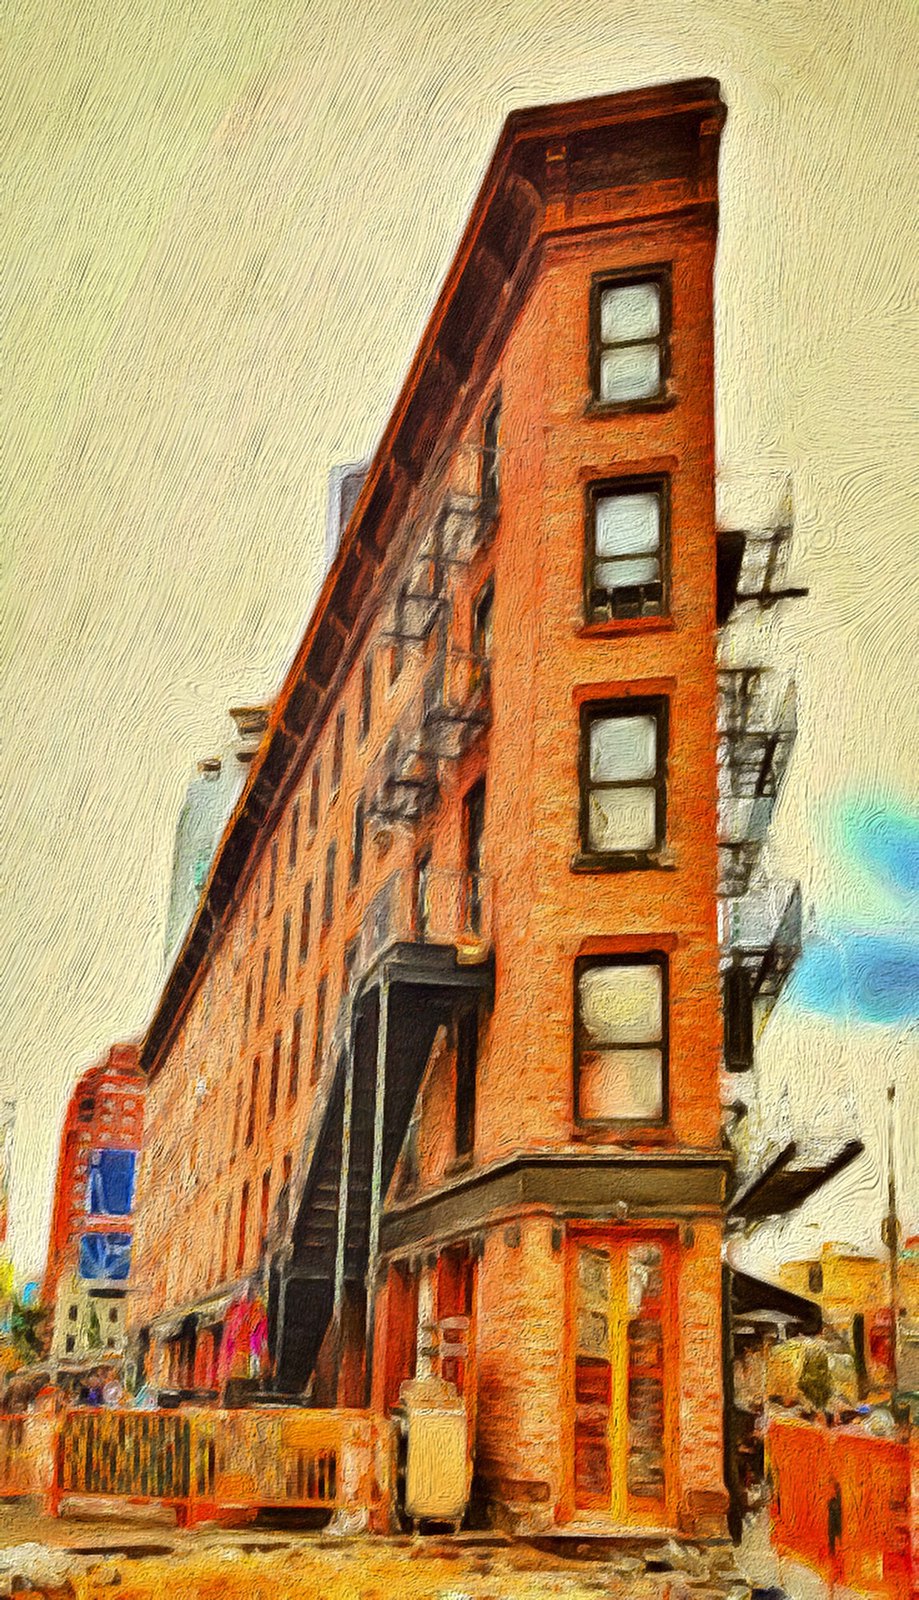 Building in the Meat Packing District, NYC